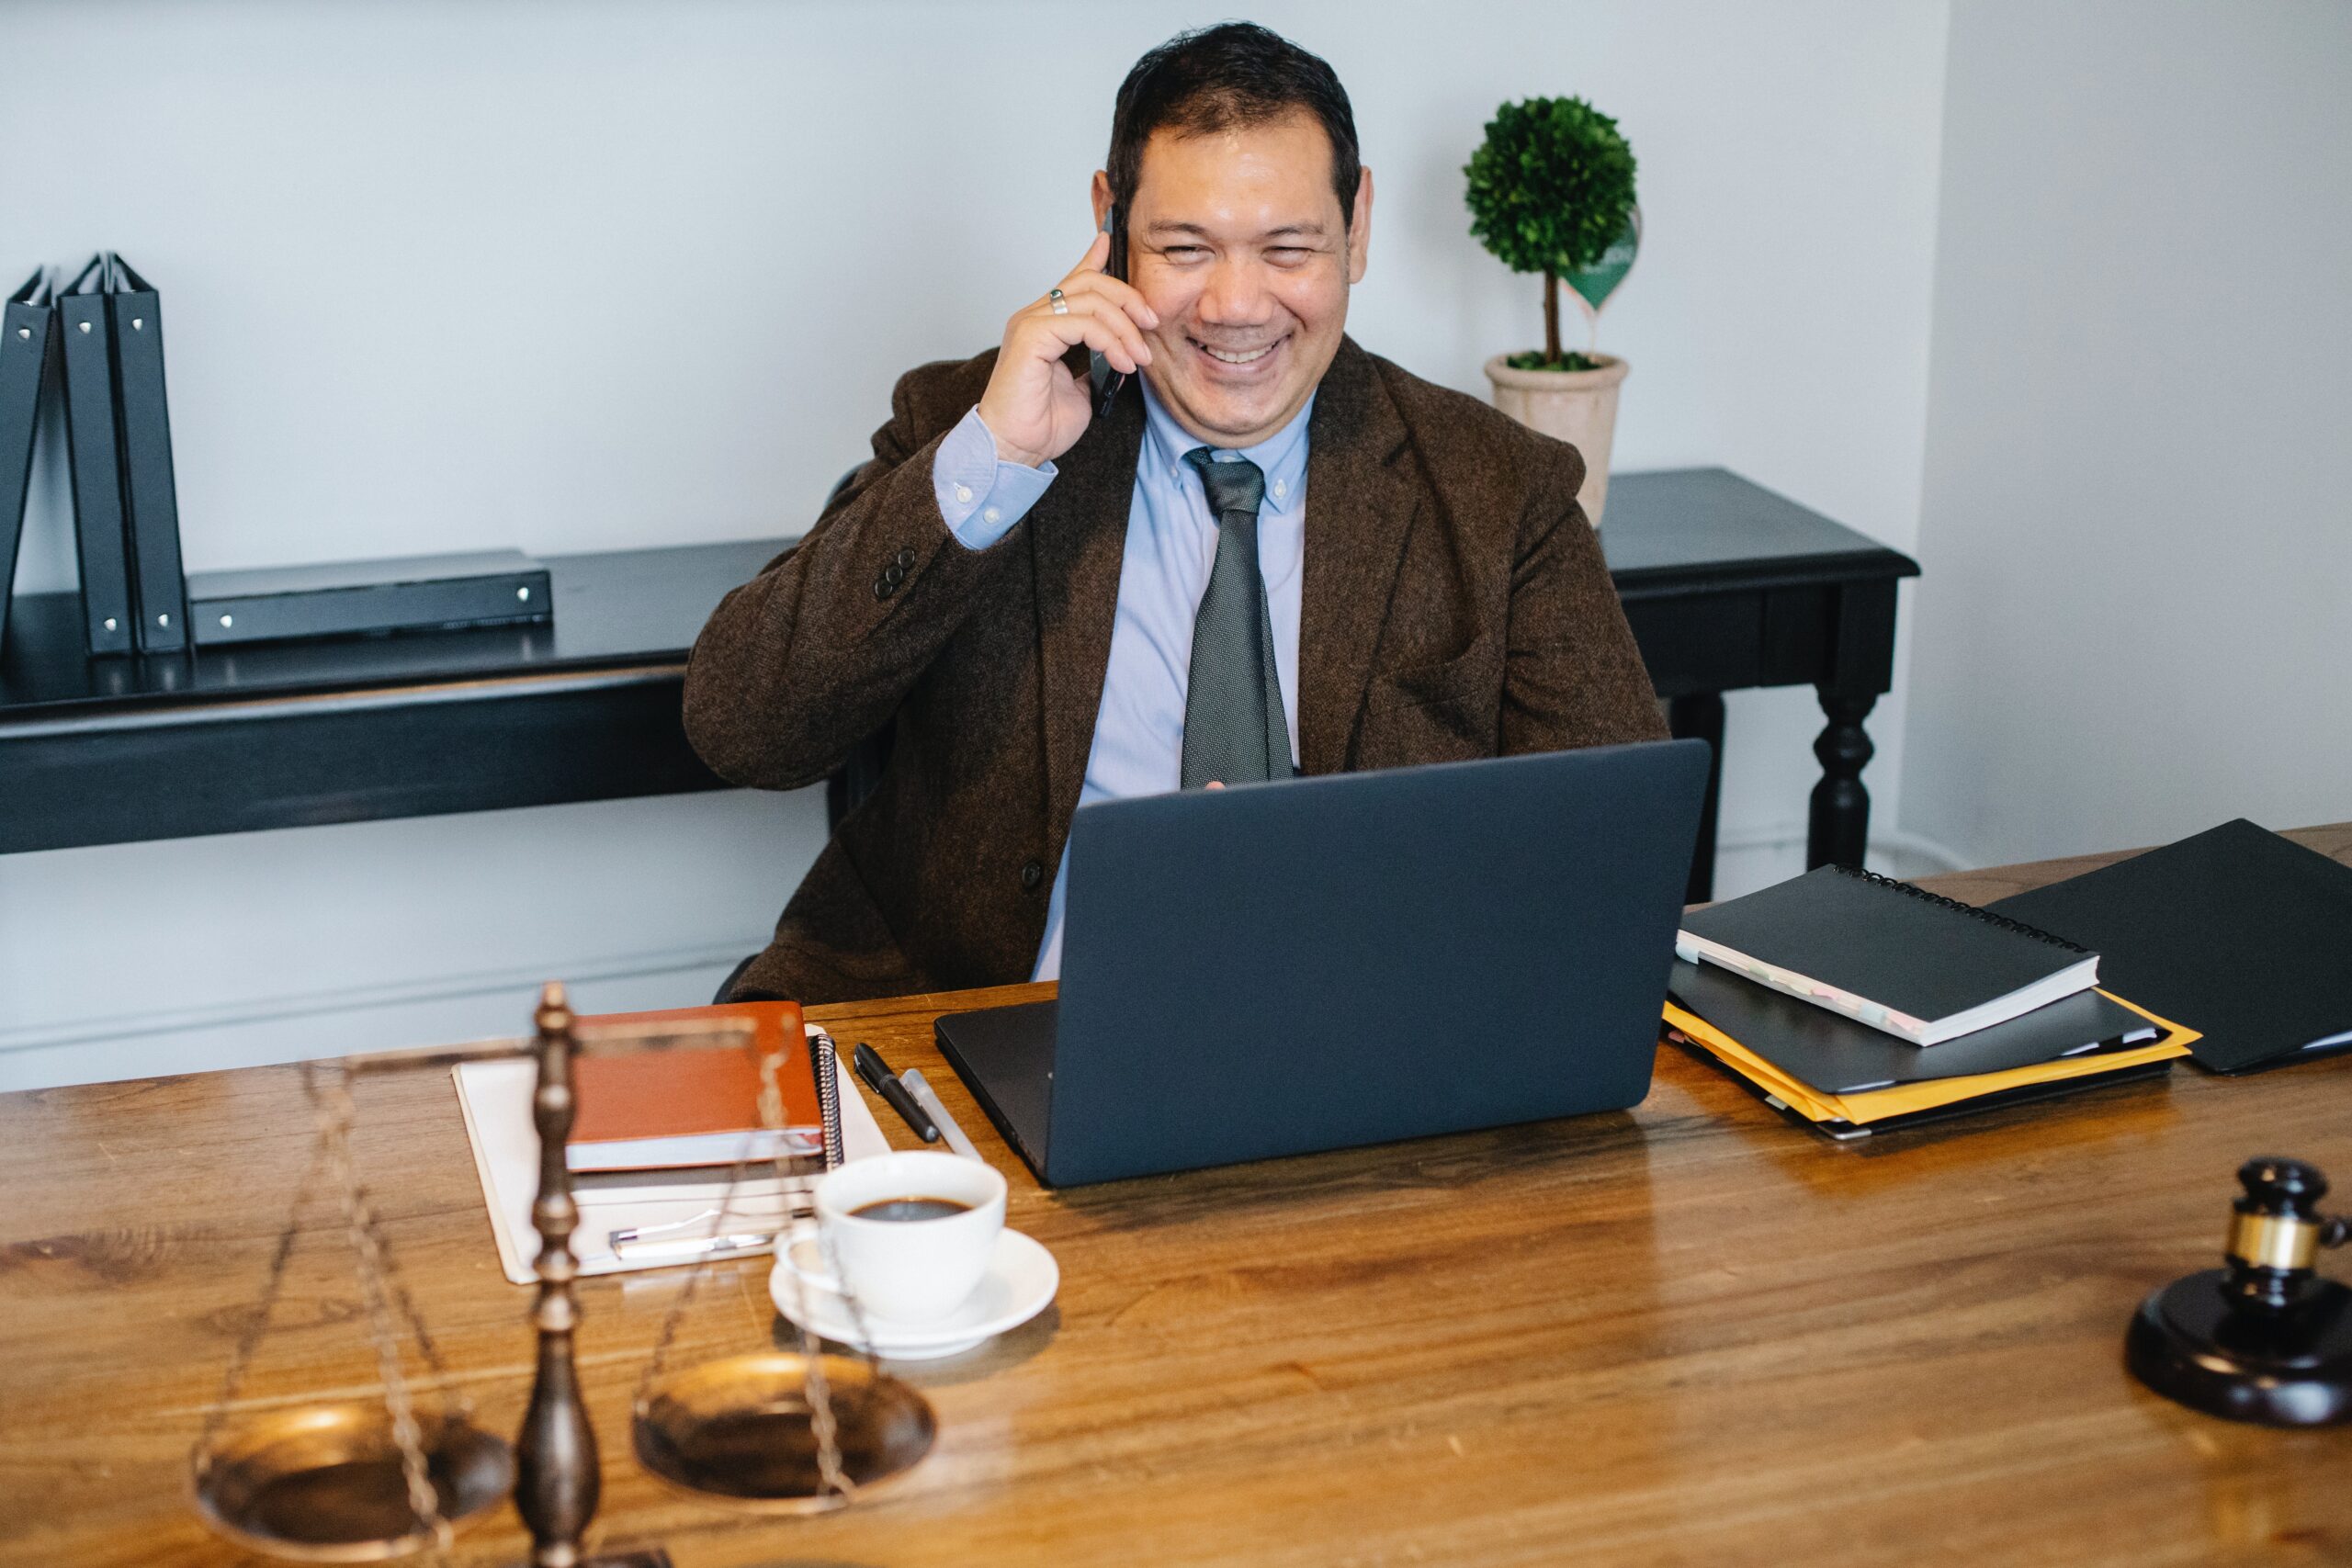 Man smiling while on sitting at desk and talking on the phone